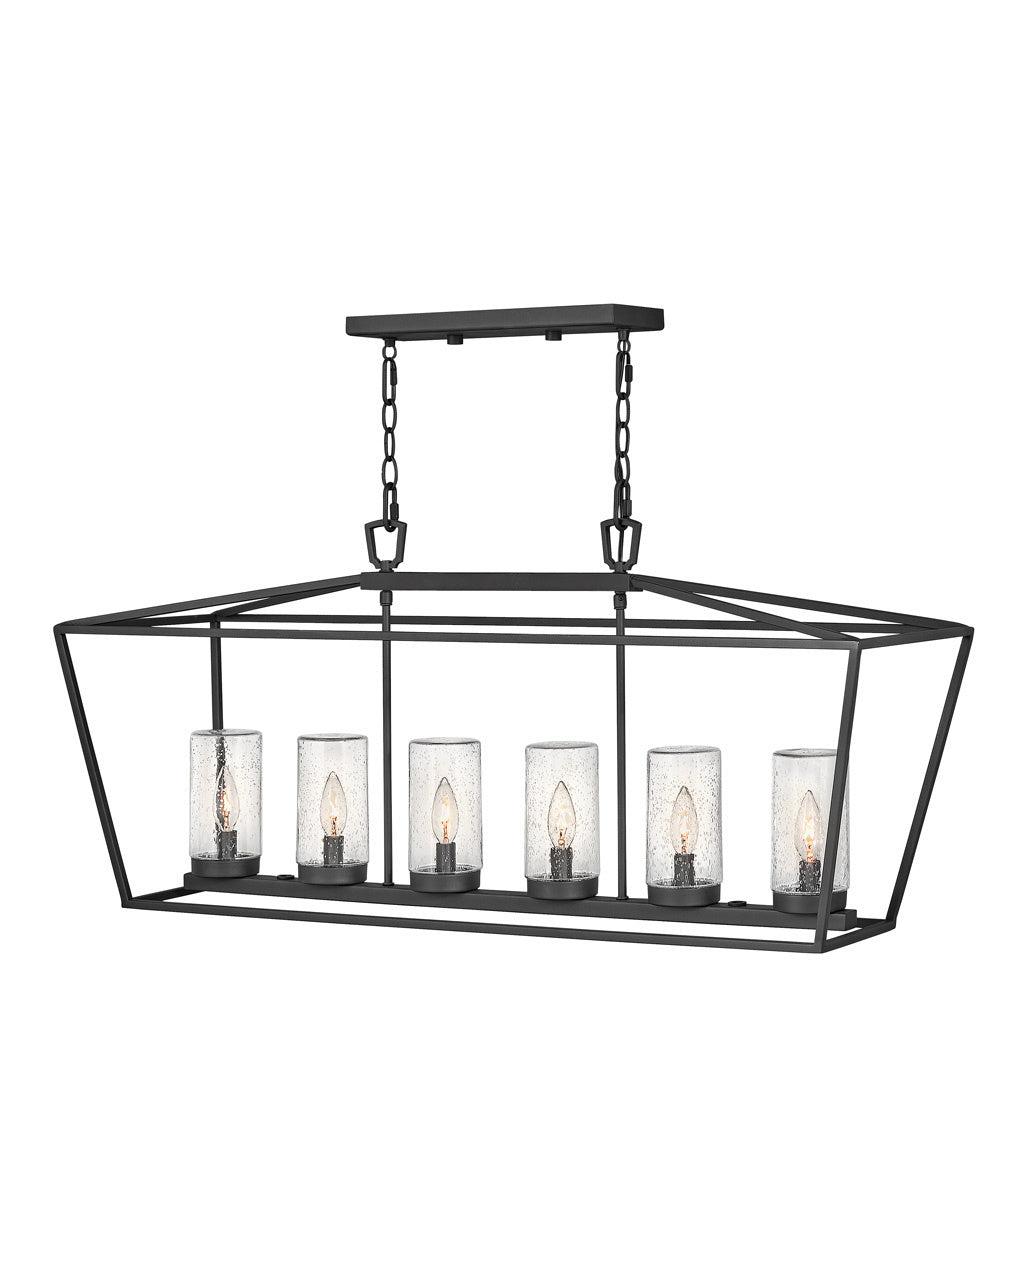 Hinkley Canada - LED Linear Chandelier - Alford Place - Museum Black- Union Lighting Luminaires Decor